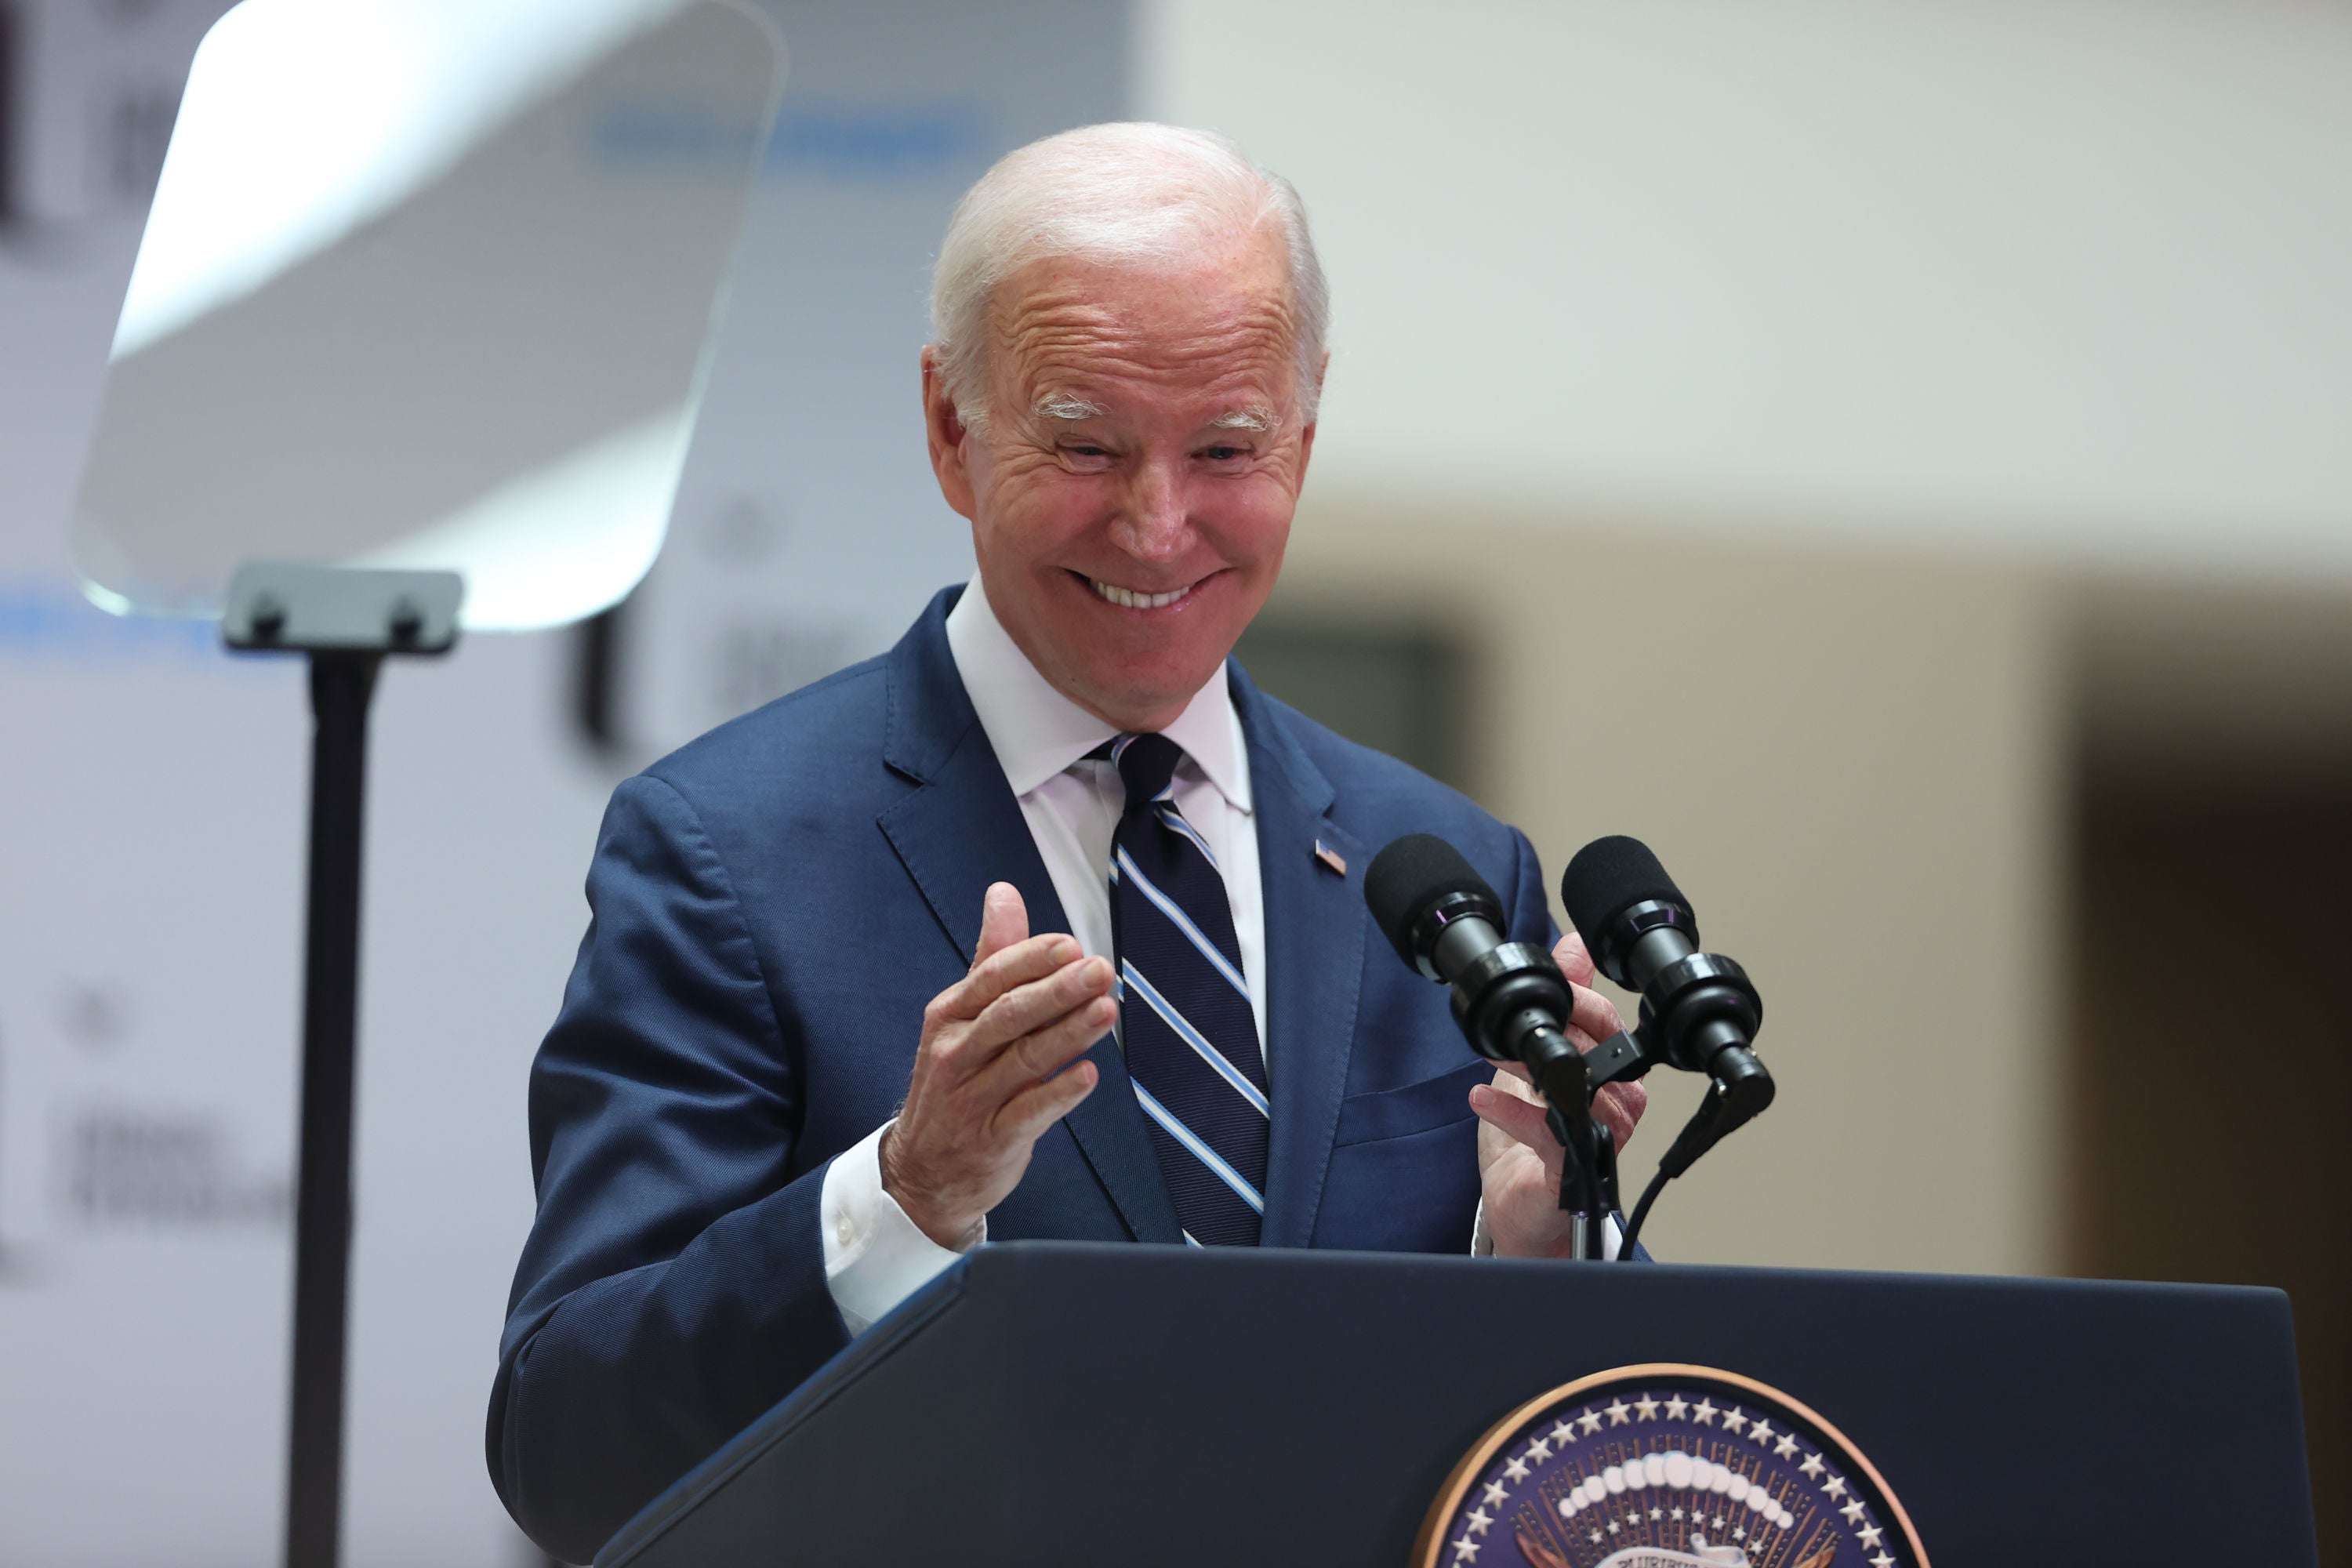 Joe Biden is trailing his predecessor in some polls, but not everyone in his camp is wringing their hands quite yet